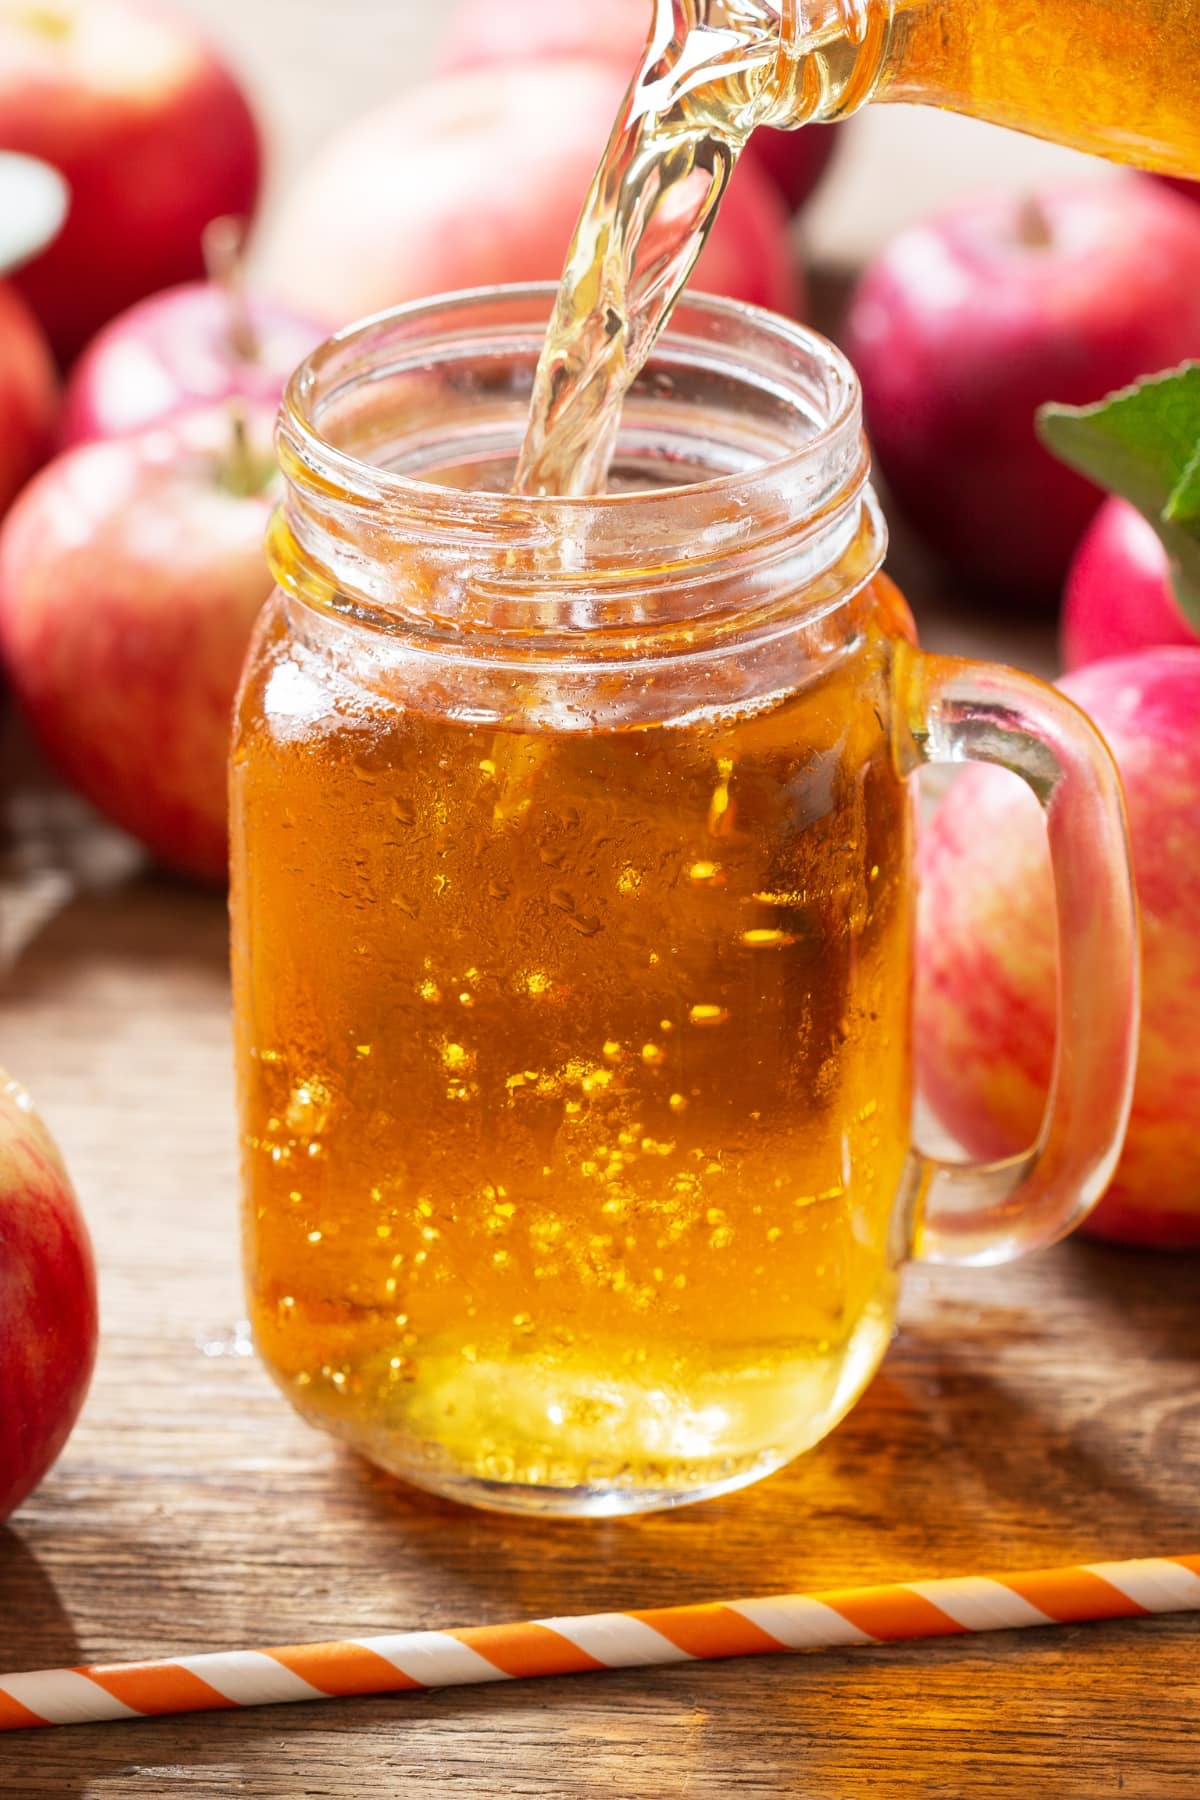 Homemade Apple Juice in a Glass Jar with Fresh Apples